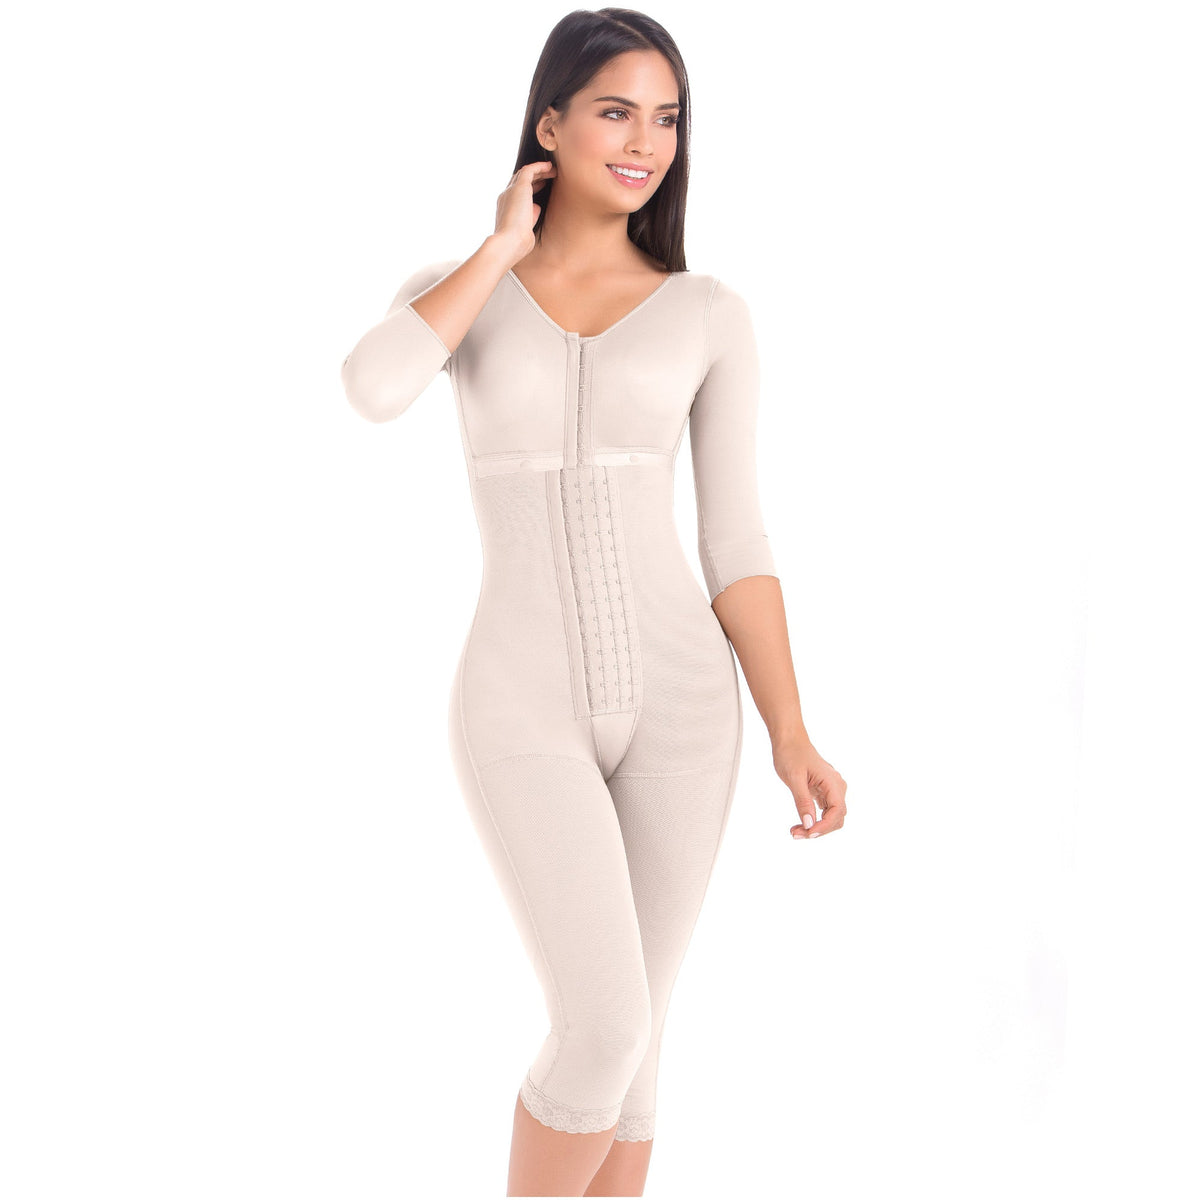 MariaE Fajas 9562 | Post Surgery Bodysuit | Full Body Shaper | Tummy Control Butt Lifter | Knee Length Shapewear with Sleeves